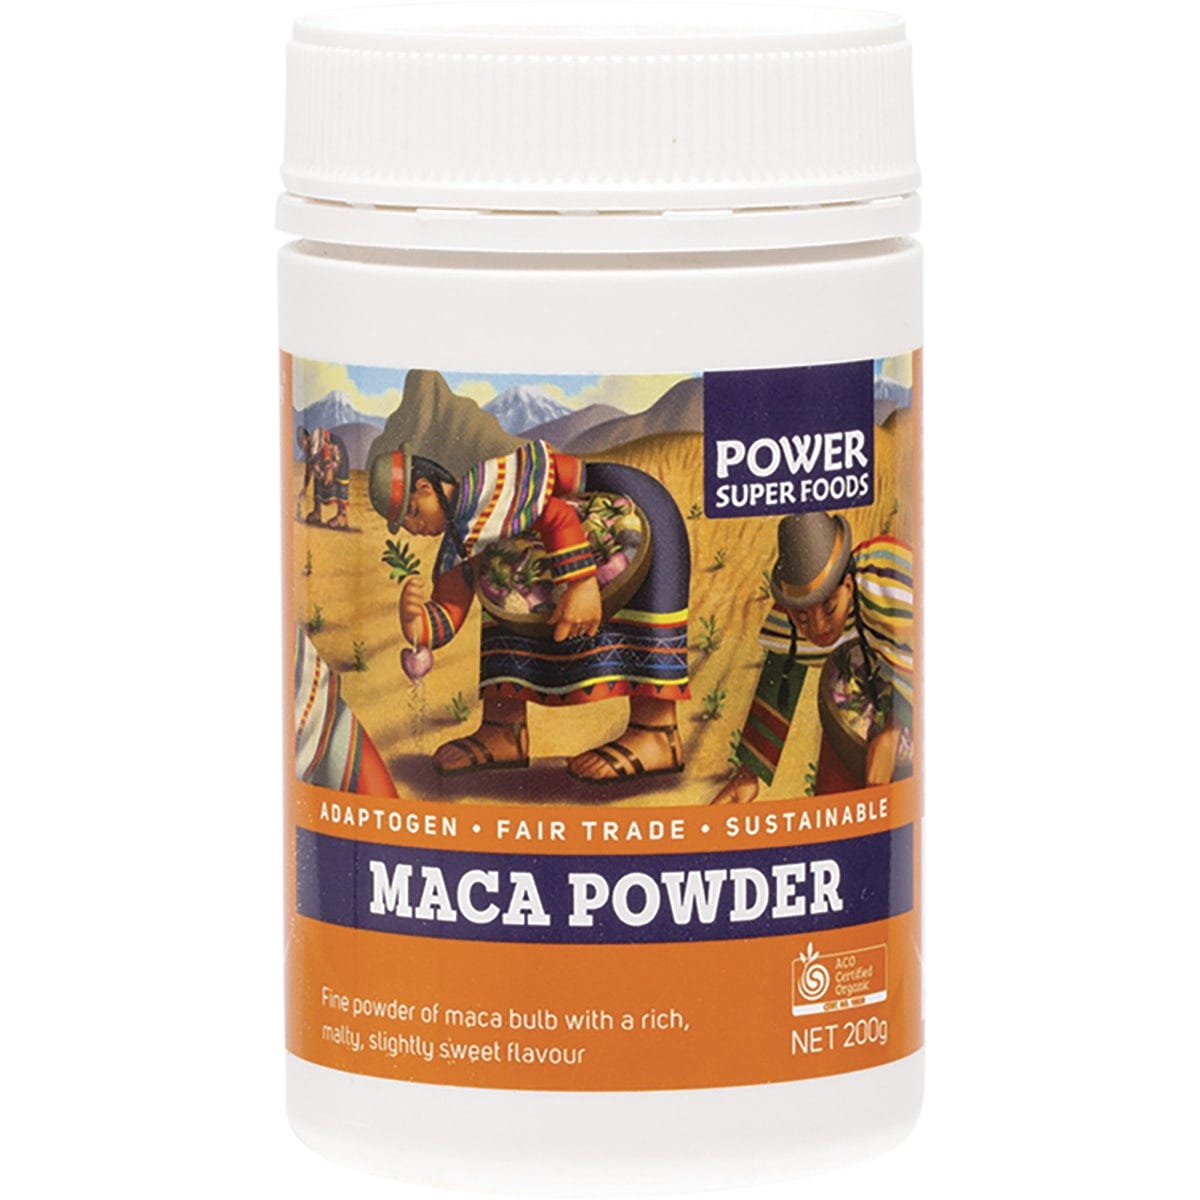 Power Super Foods Maca Powder The Origin Series 200g - Dr Earth - Other Superfoods